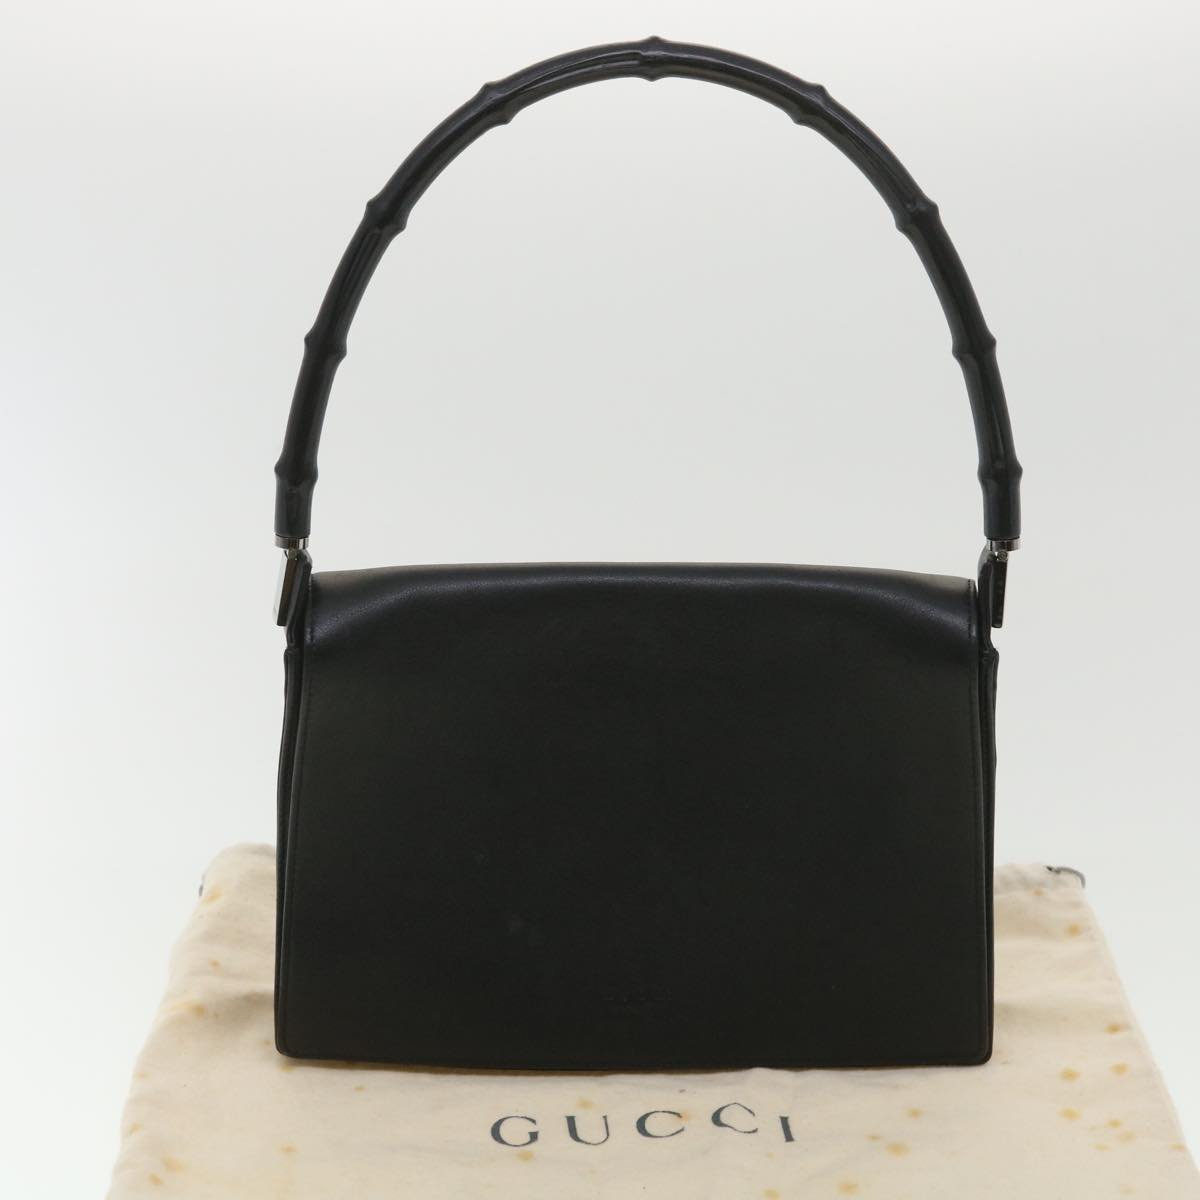 GUCCI Bamboo Shoulder Bag Leather Black 001 3239 001998 Auth am3859